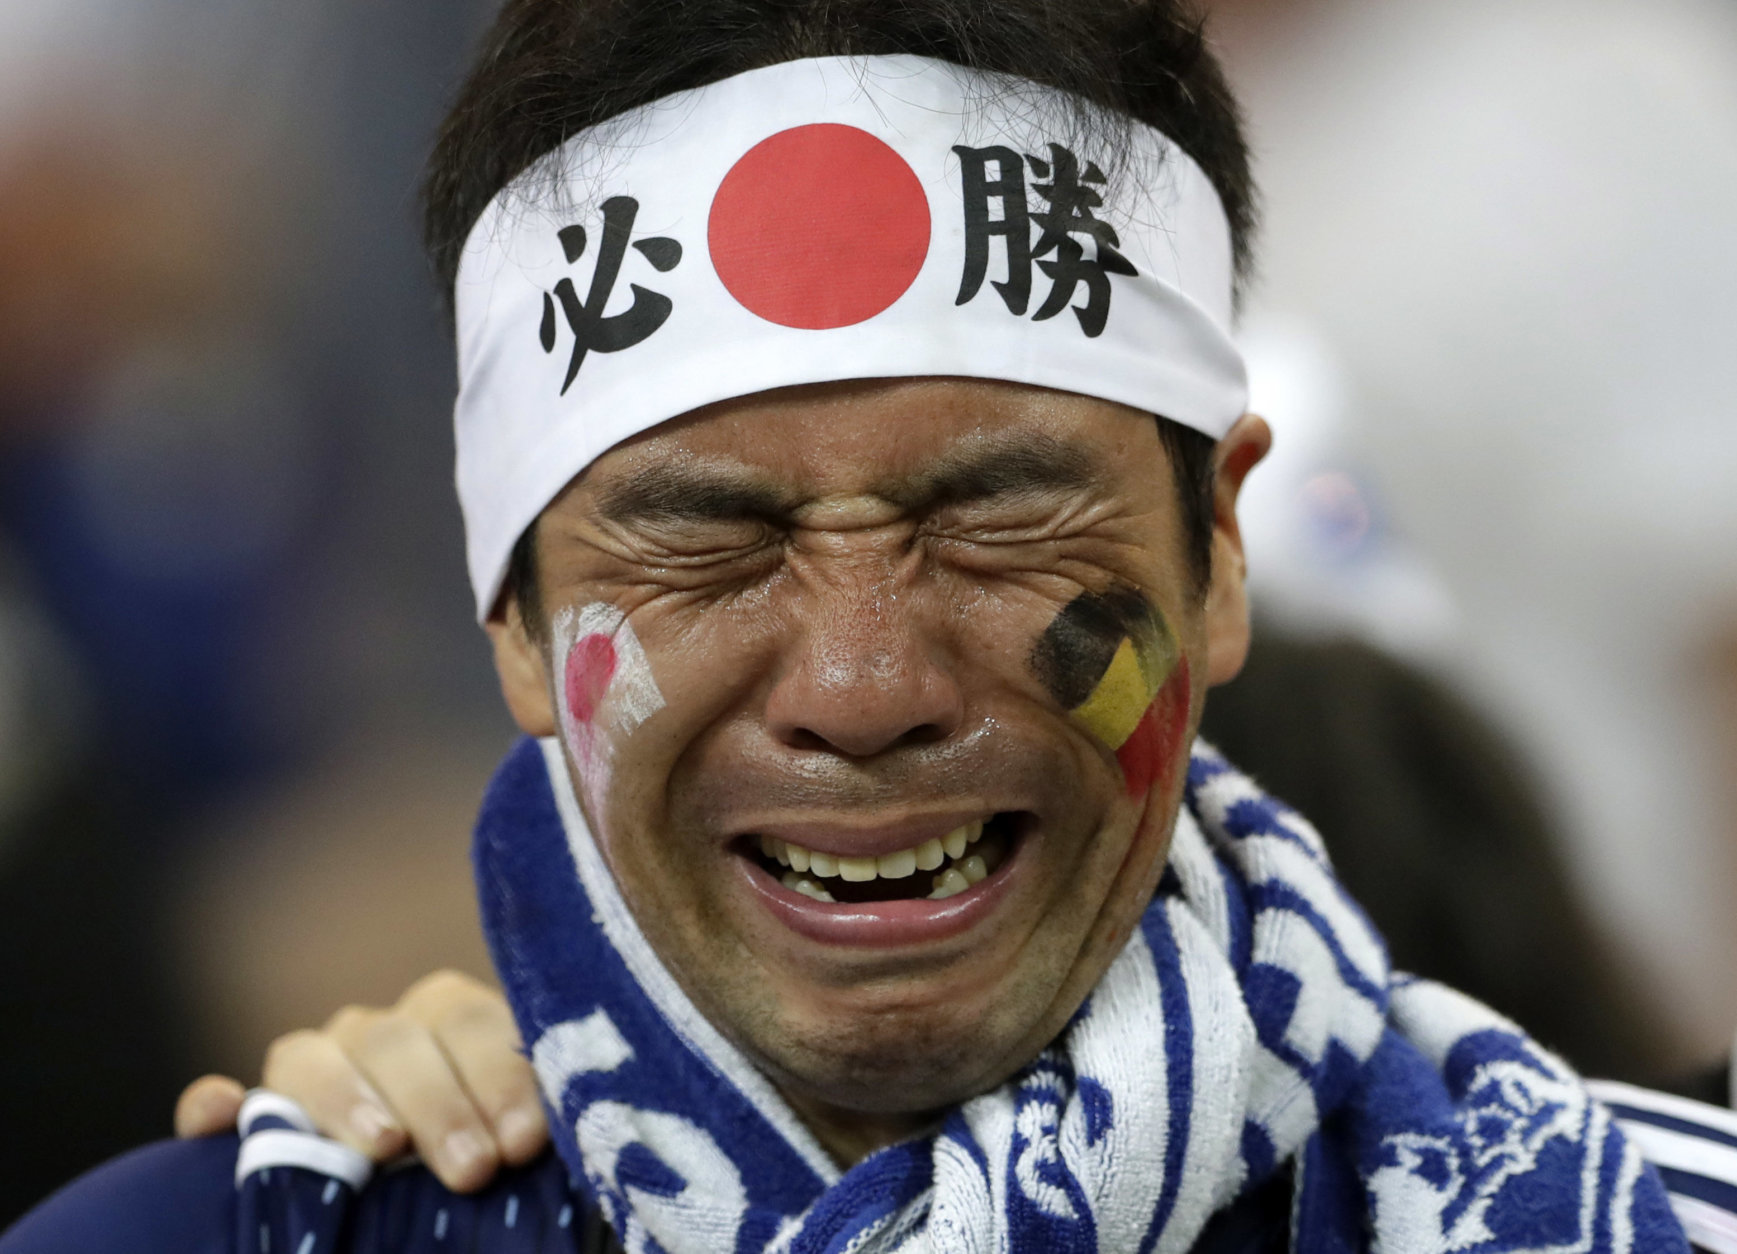 A Japan supporters cries after losing the round of 16 match between Belgium and Japan at the 2018 soccer World Cup in the Rostov Arena, in Rostov-on-Don, Russia, Monday, July 2, 2018. (AP Photo/Petr David Josek)